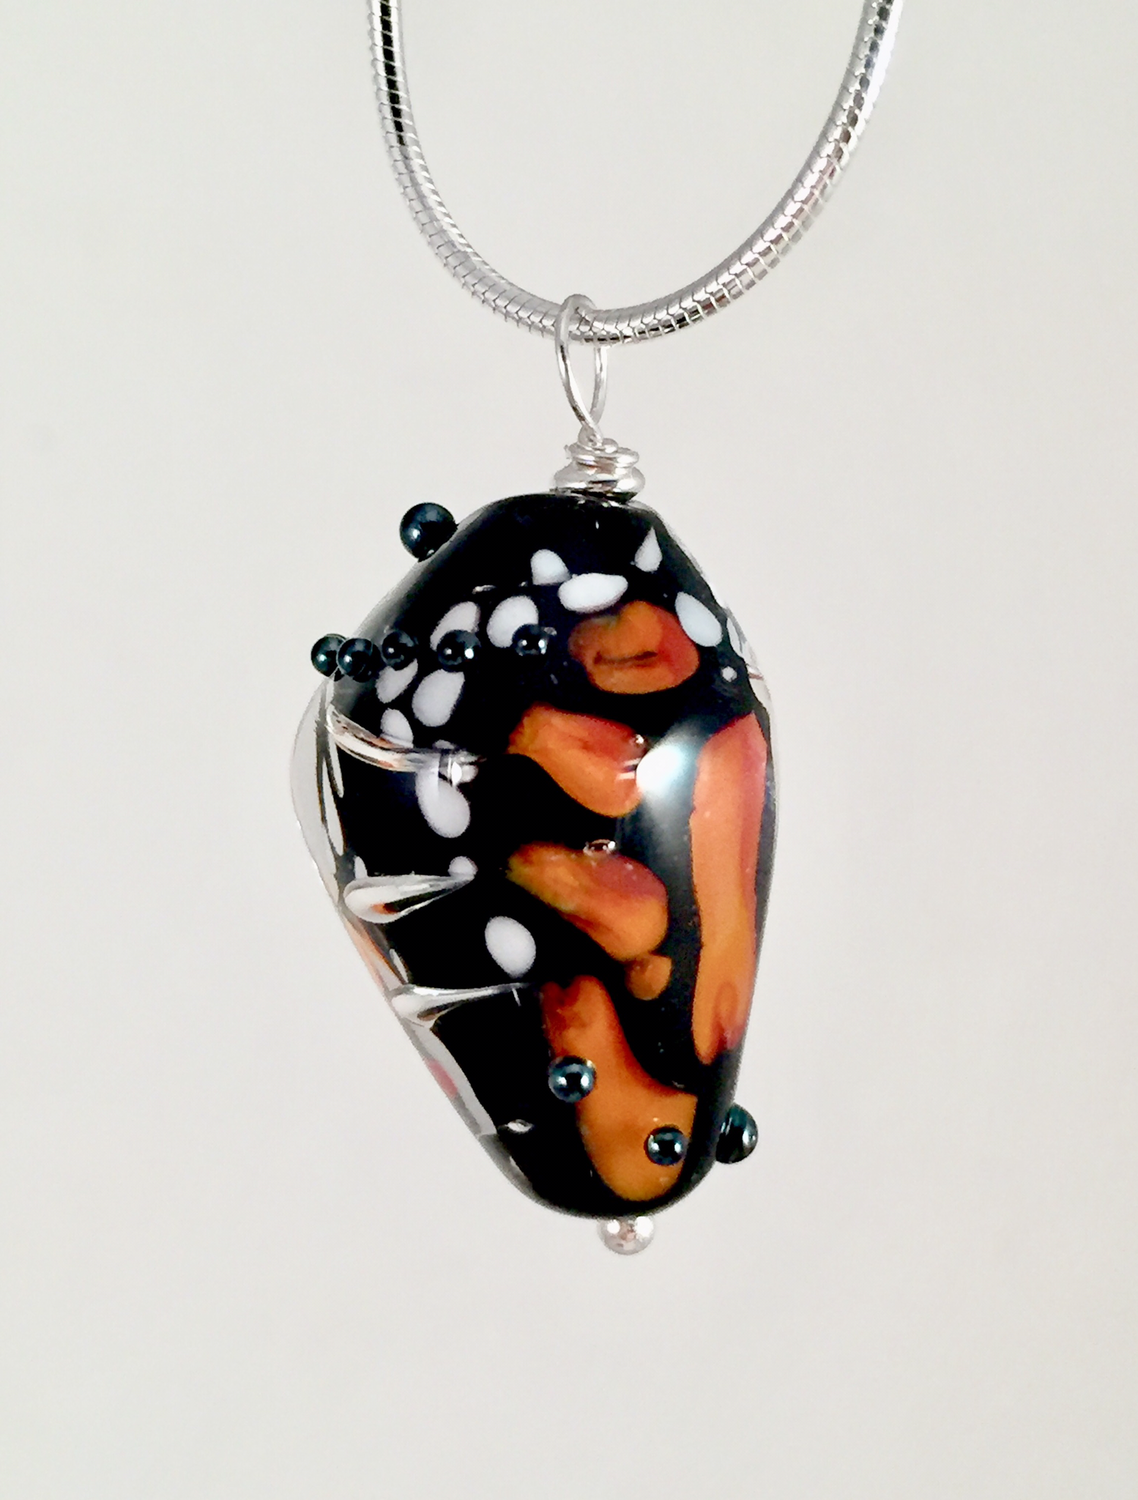 Monarch butterfly chrysalis pendant, late stage